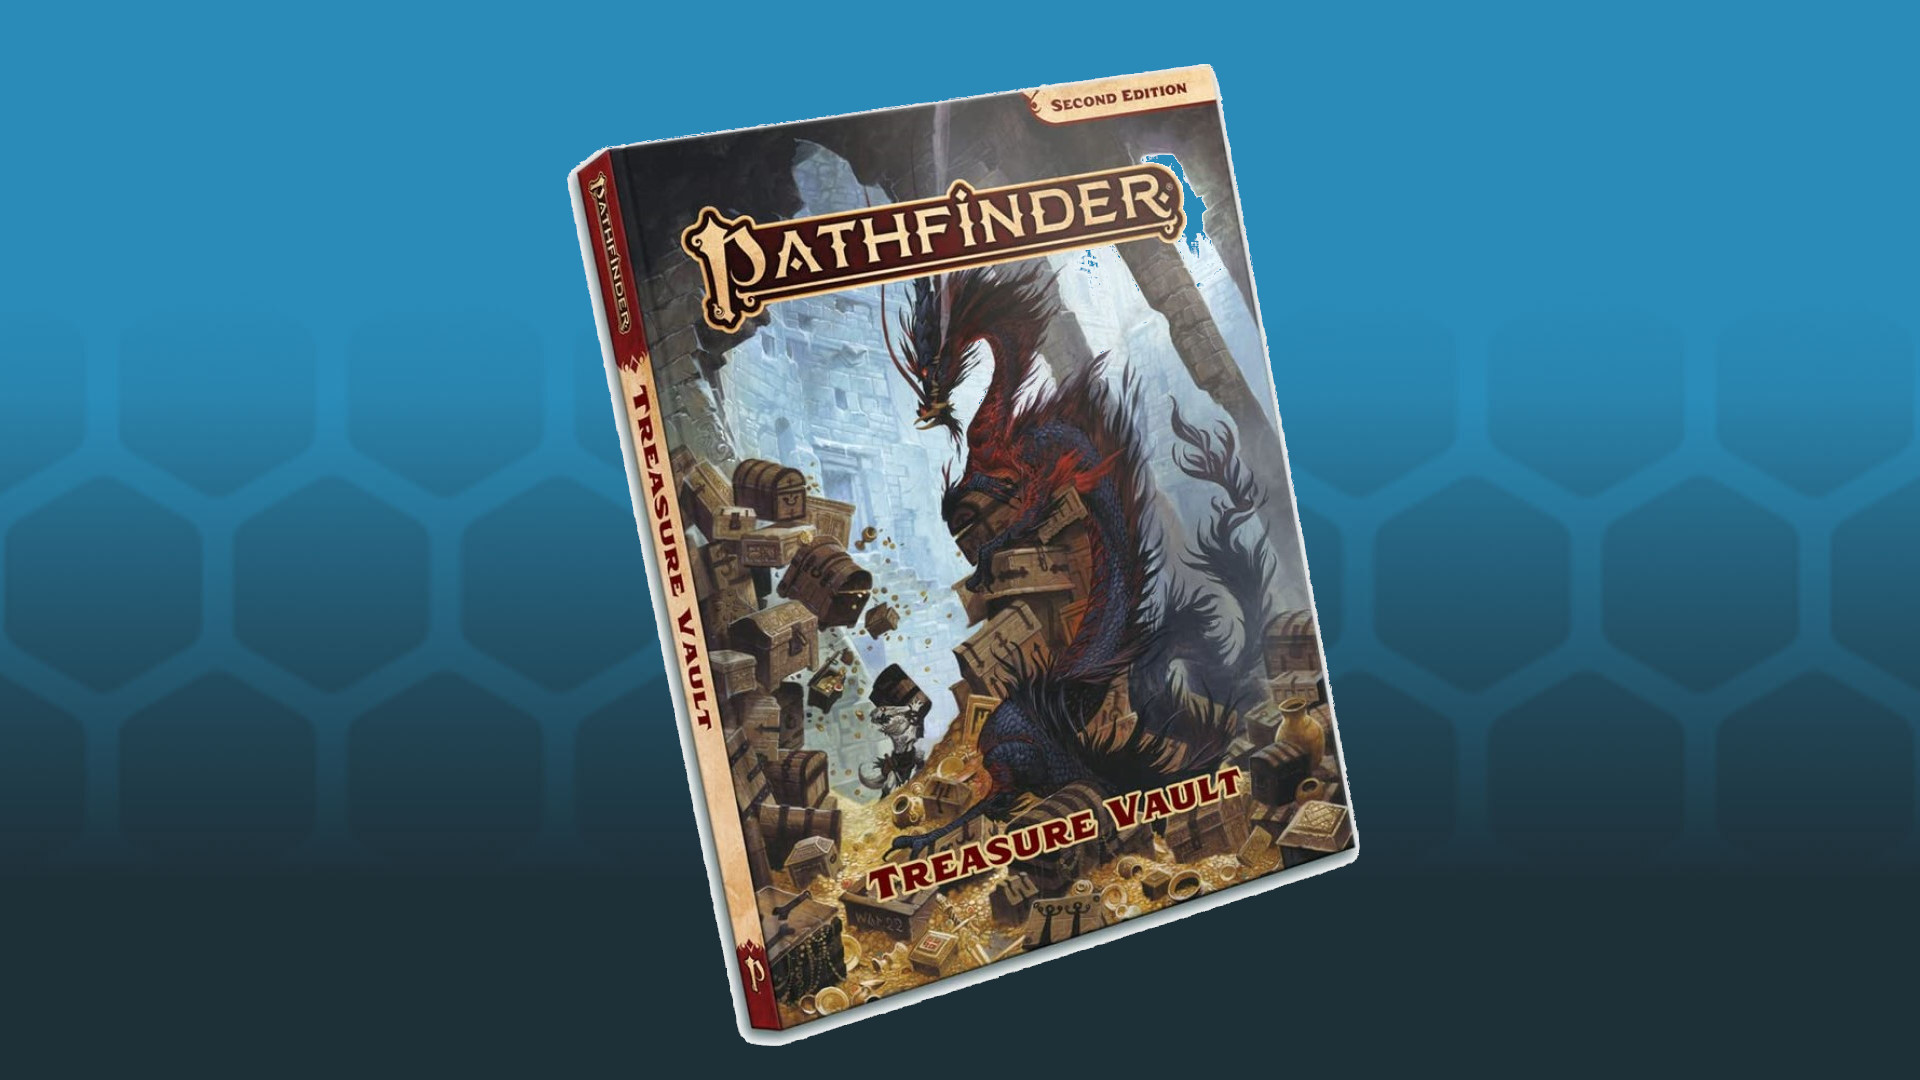 Get Your Pathfinder Books for Just $1 in this Huge RPG Humble Bundle!